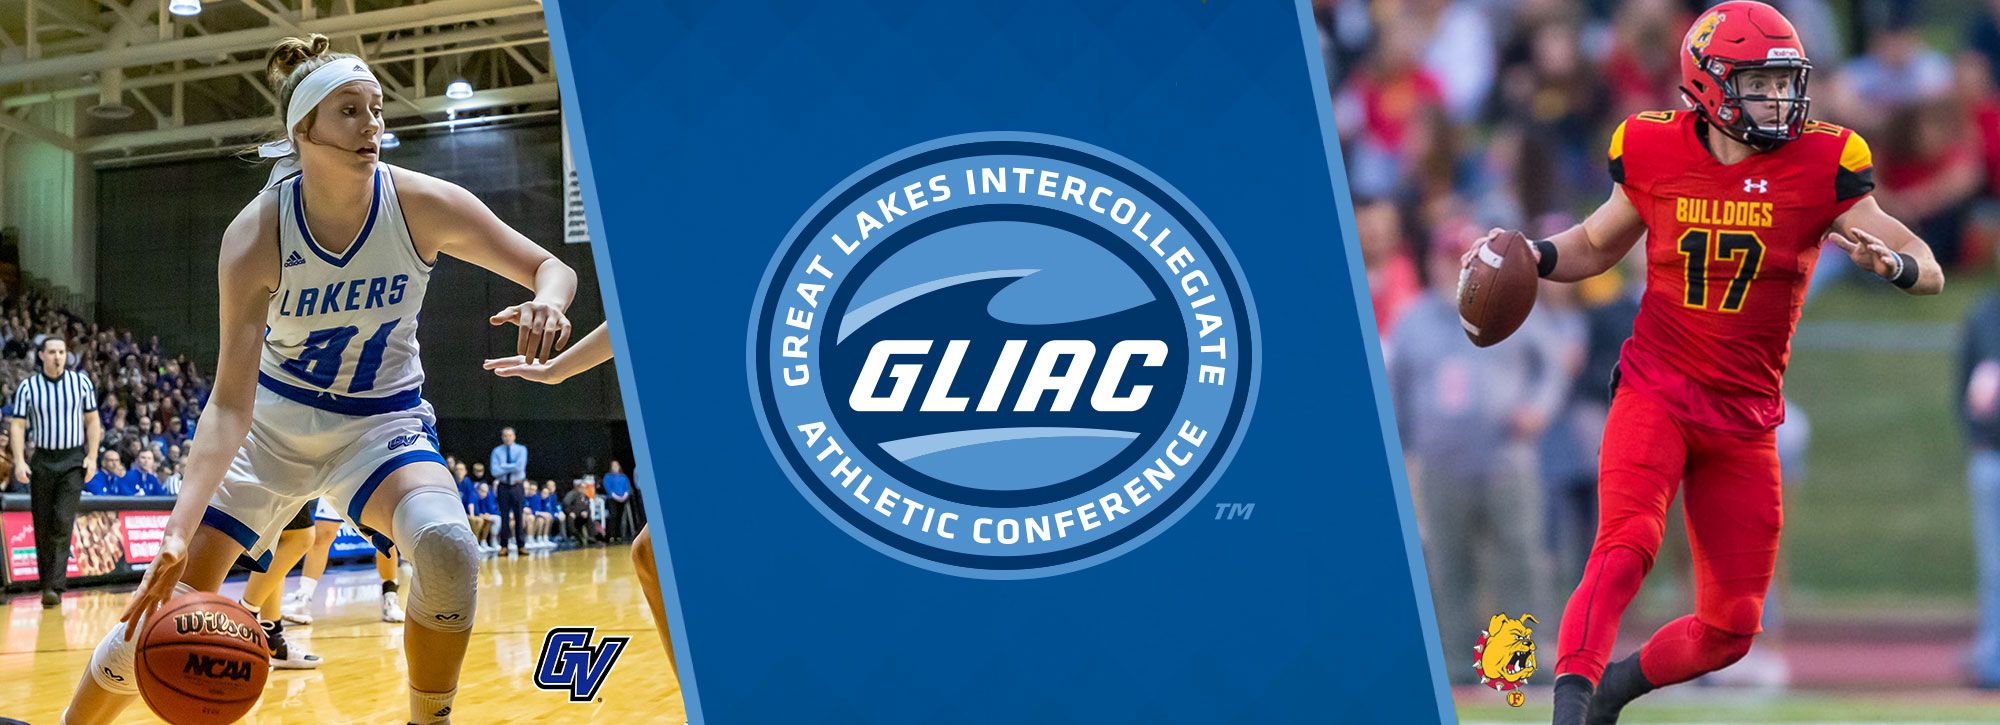 Grand Valley State's Boensch, Ferris State's Russell Named 2019-20 GLIAC Scholar-Athletes of the Year